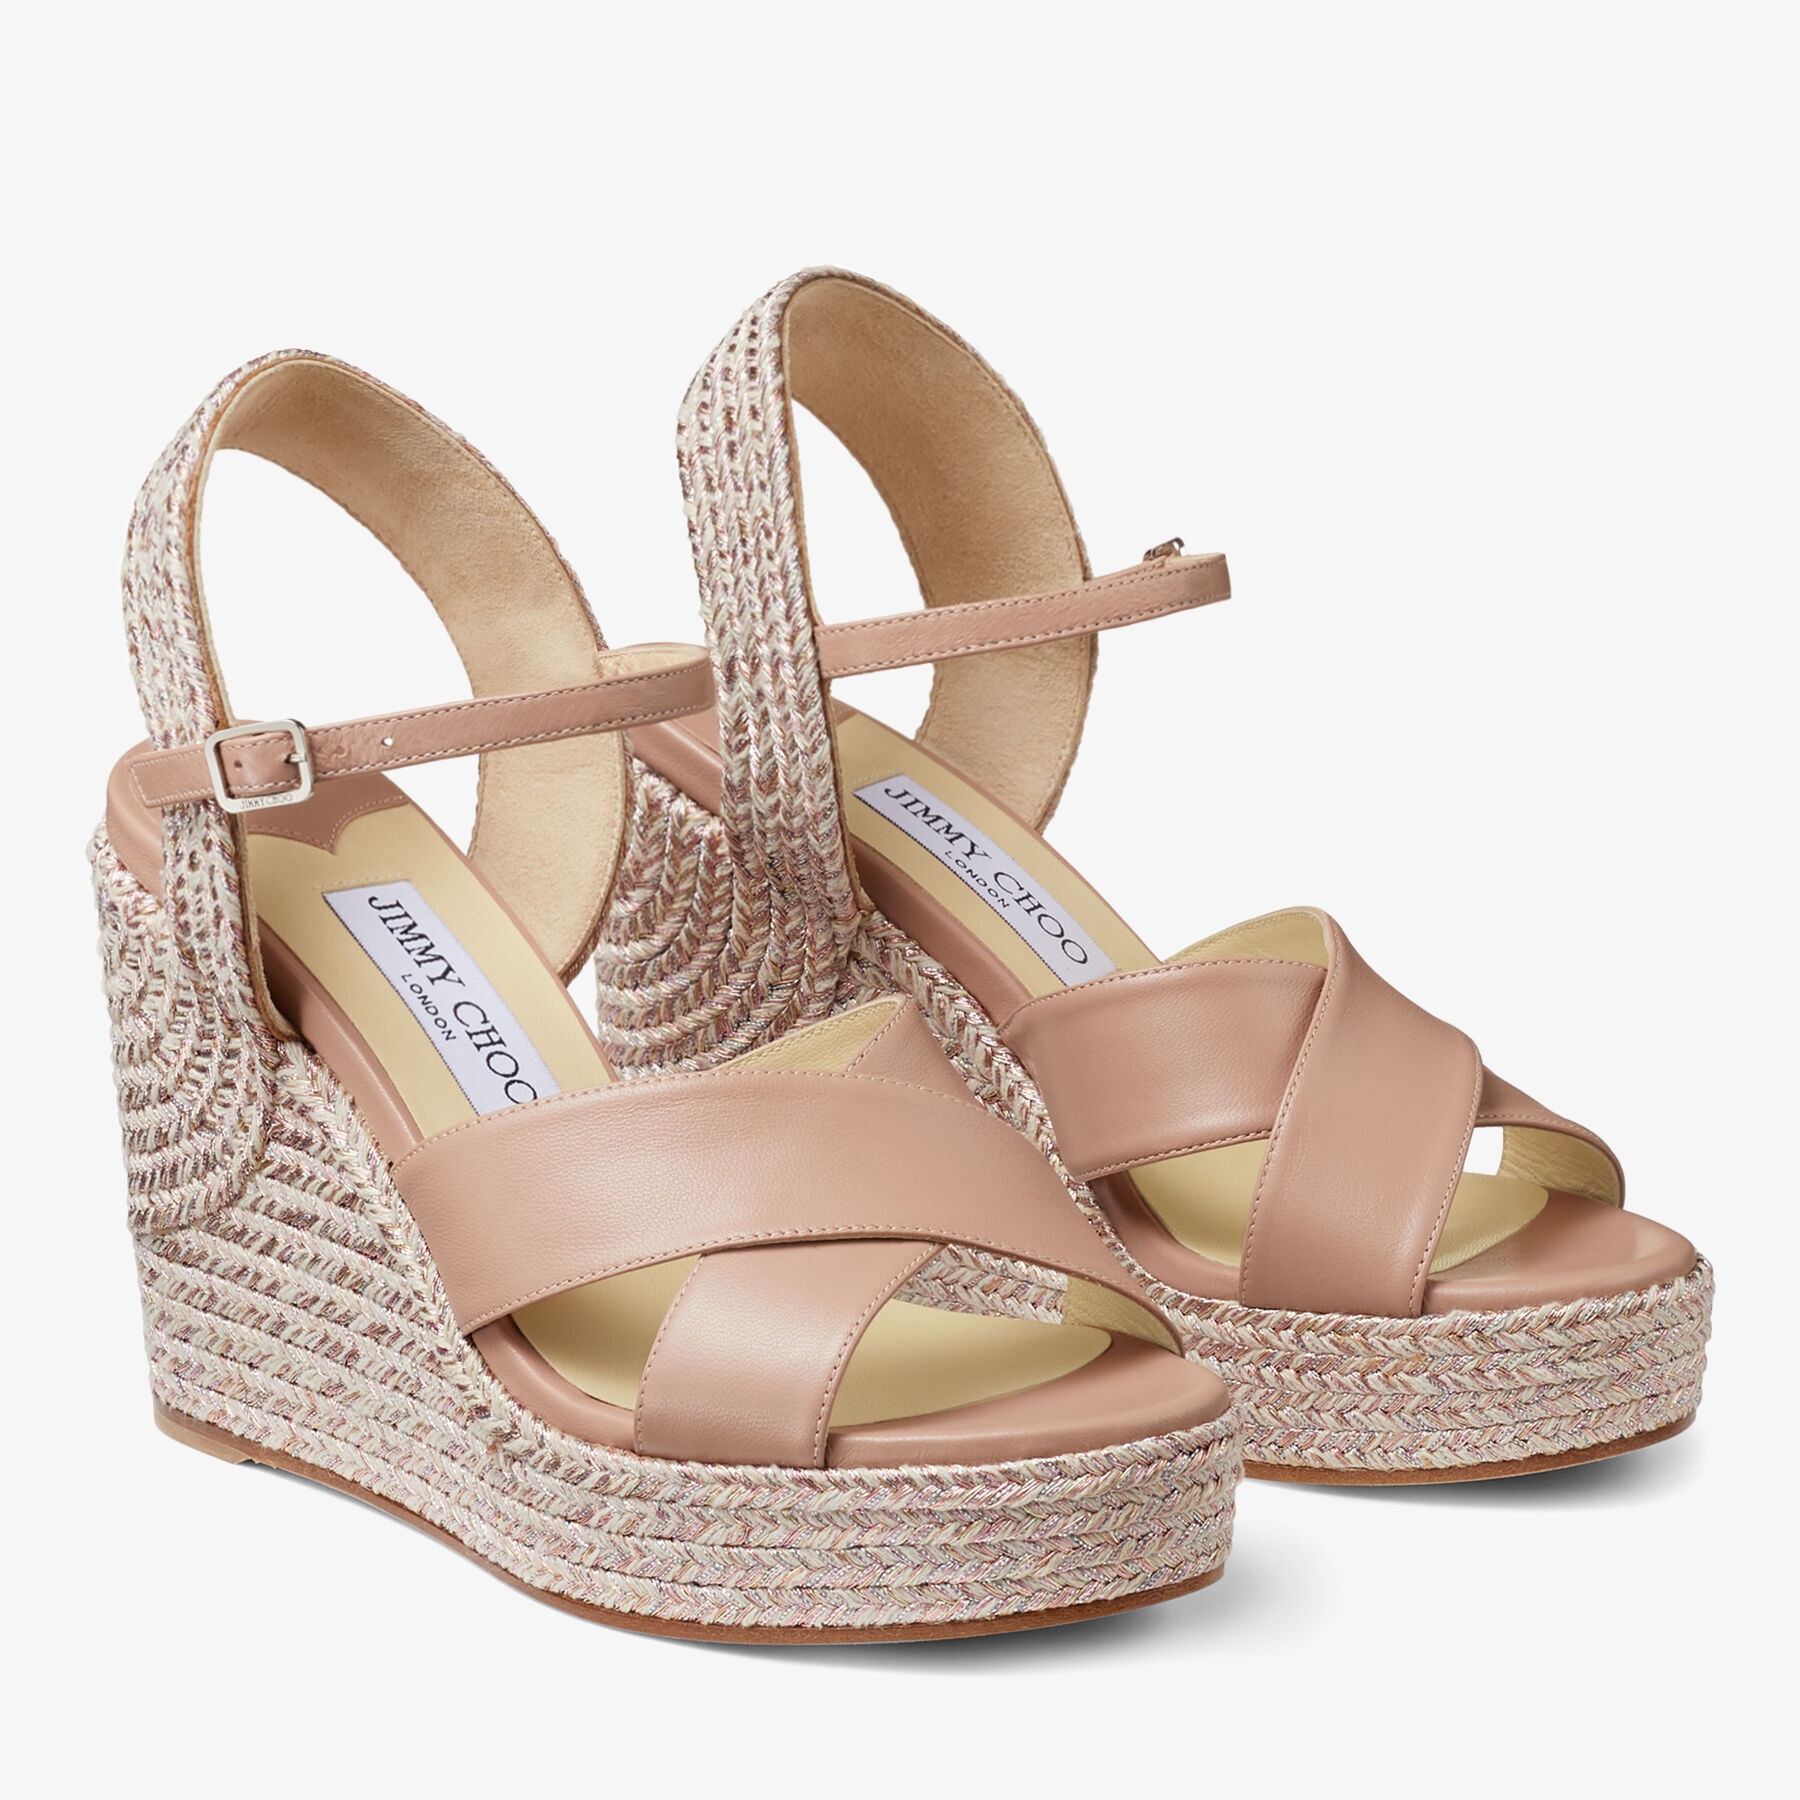 Dellena 100
Ballet Pink Nappa Leather Wedges with Metallic Rope Trim - 3